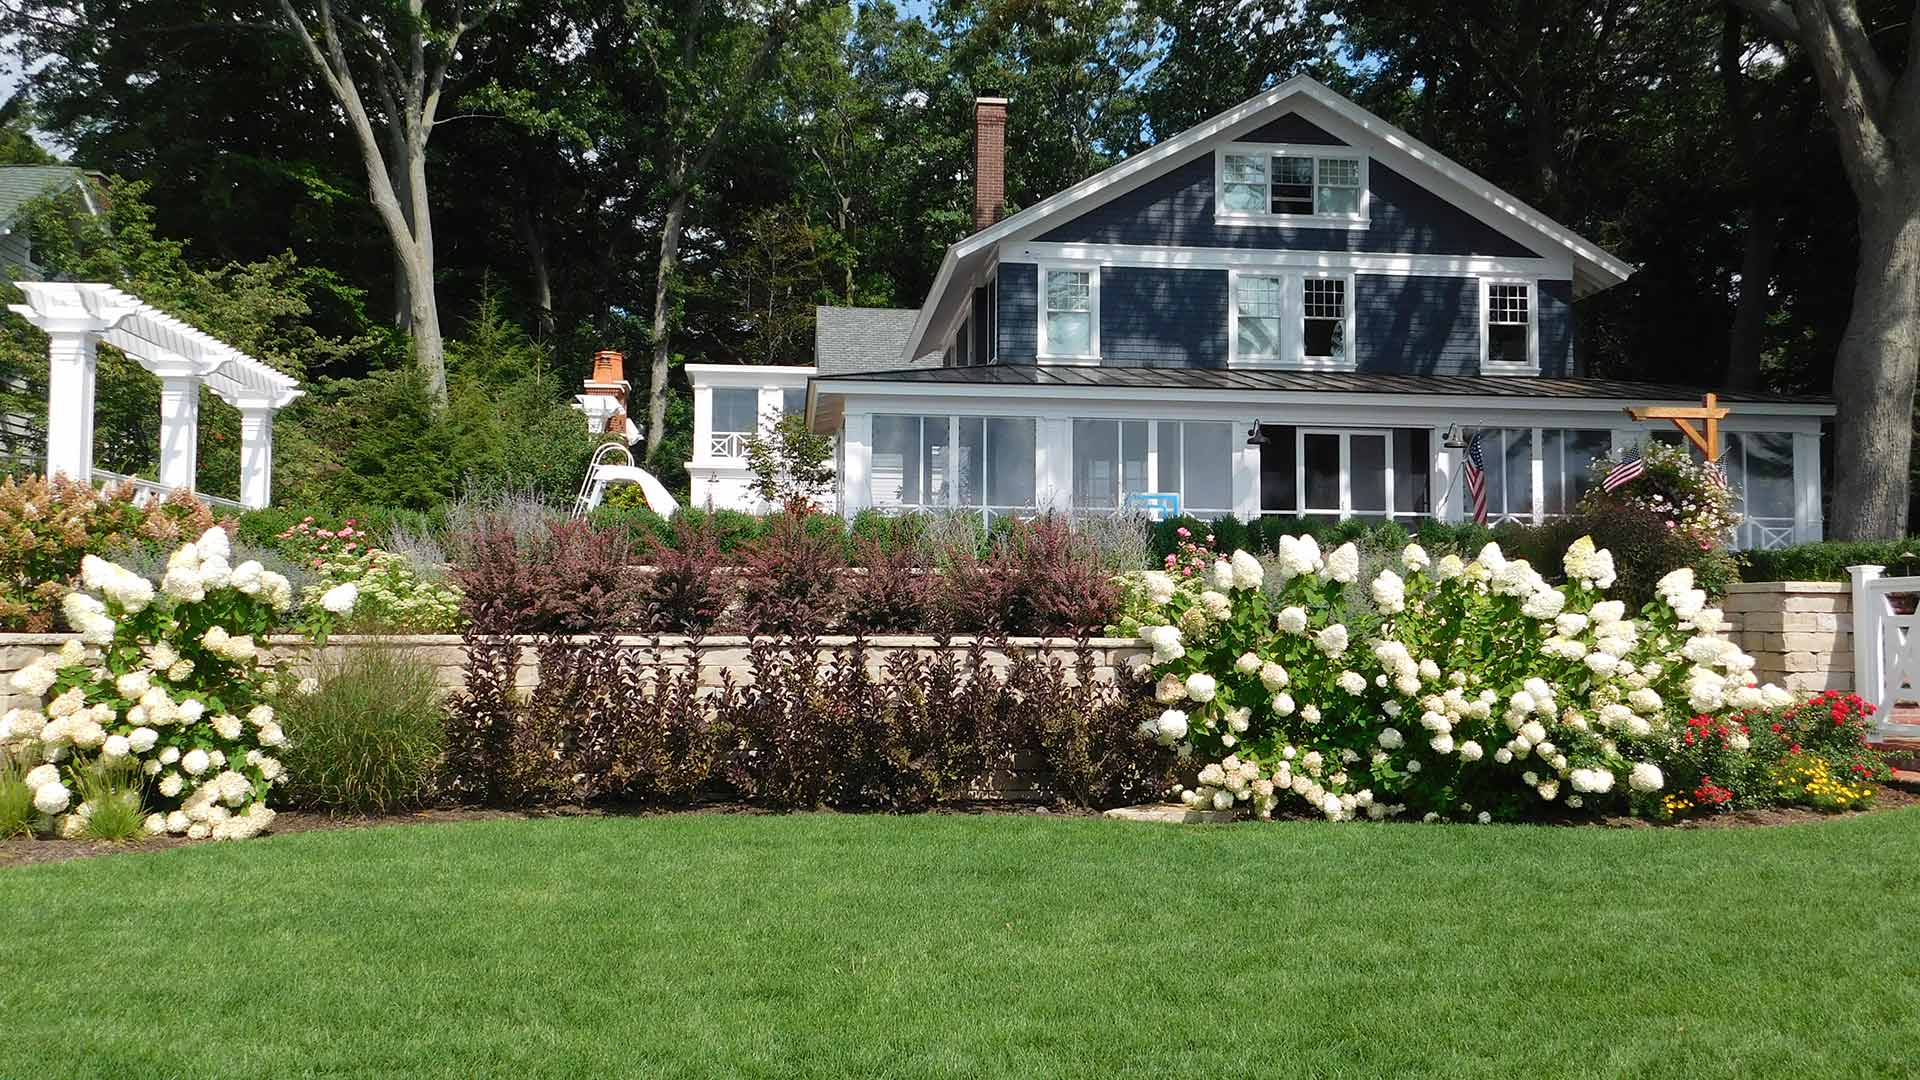 A home with a beautiful landscape and healthy lawn in West Olive, MI.